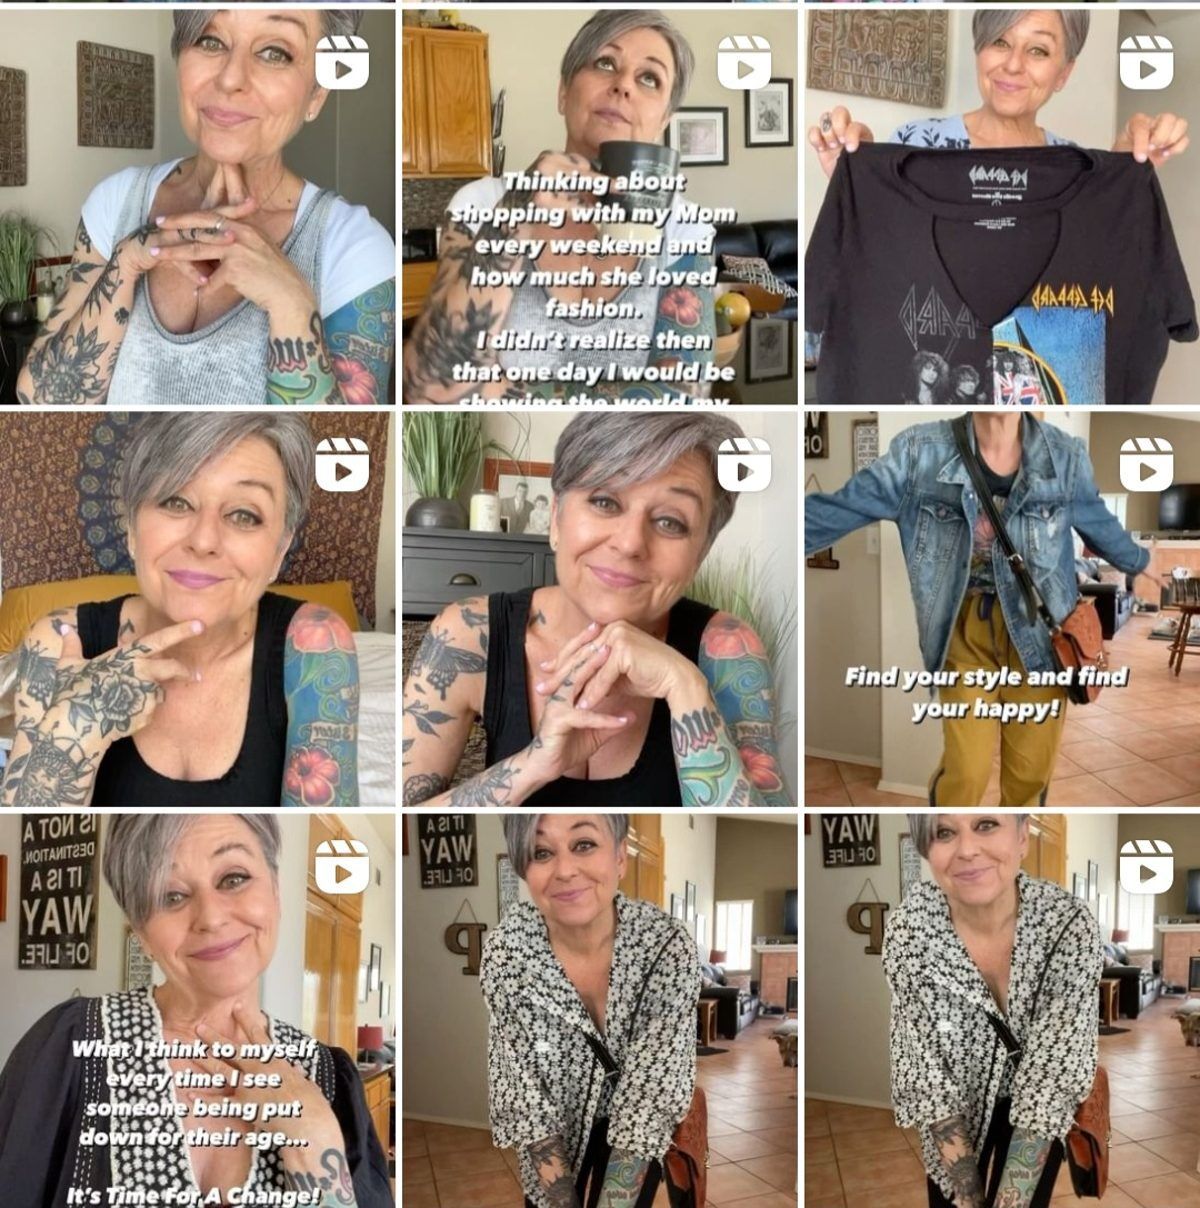 Lonni - Embracing Gray Hair, Tattoos, and Wear Whatever You Want Style - Lonni is a top 50 plus woman on Instagram